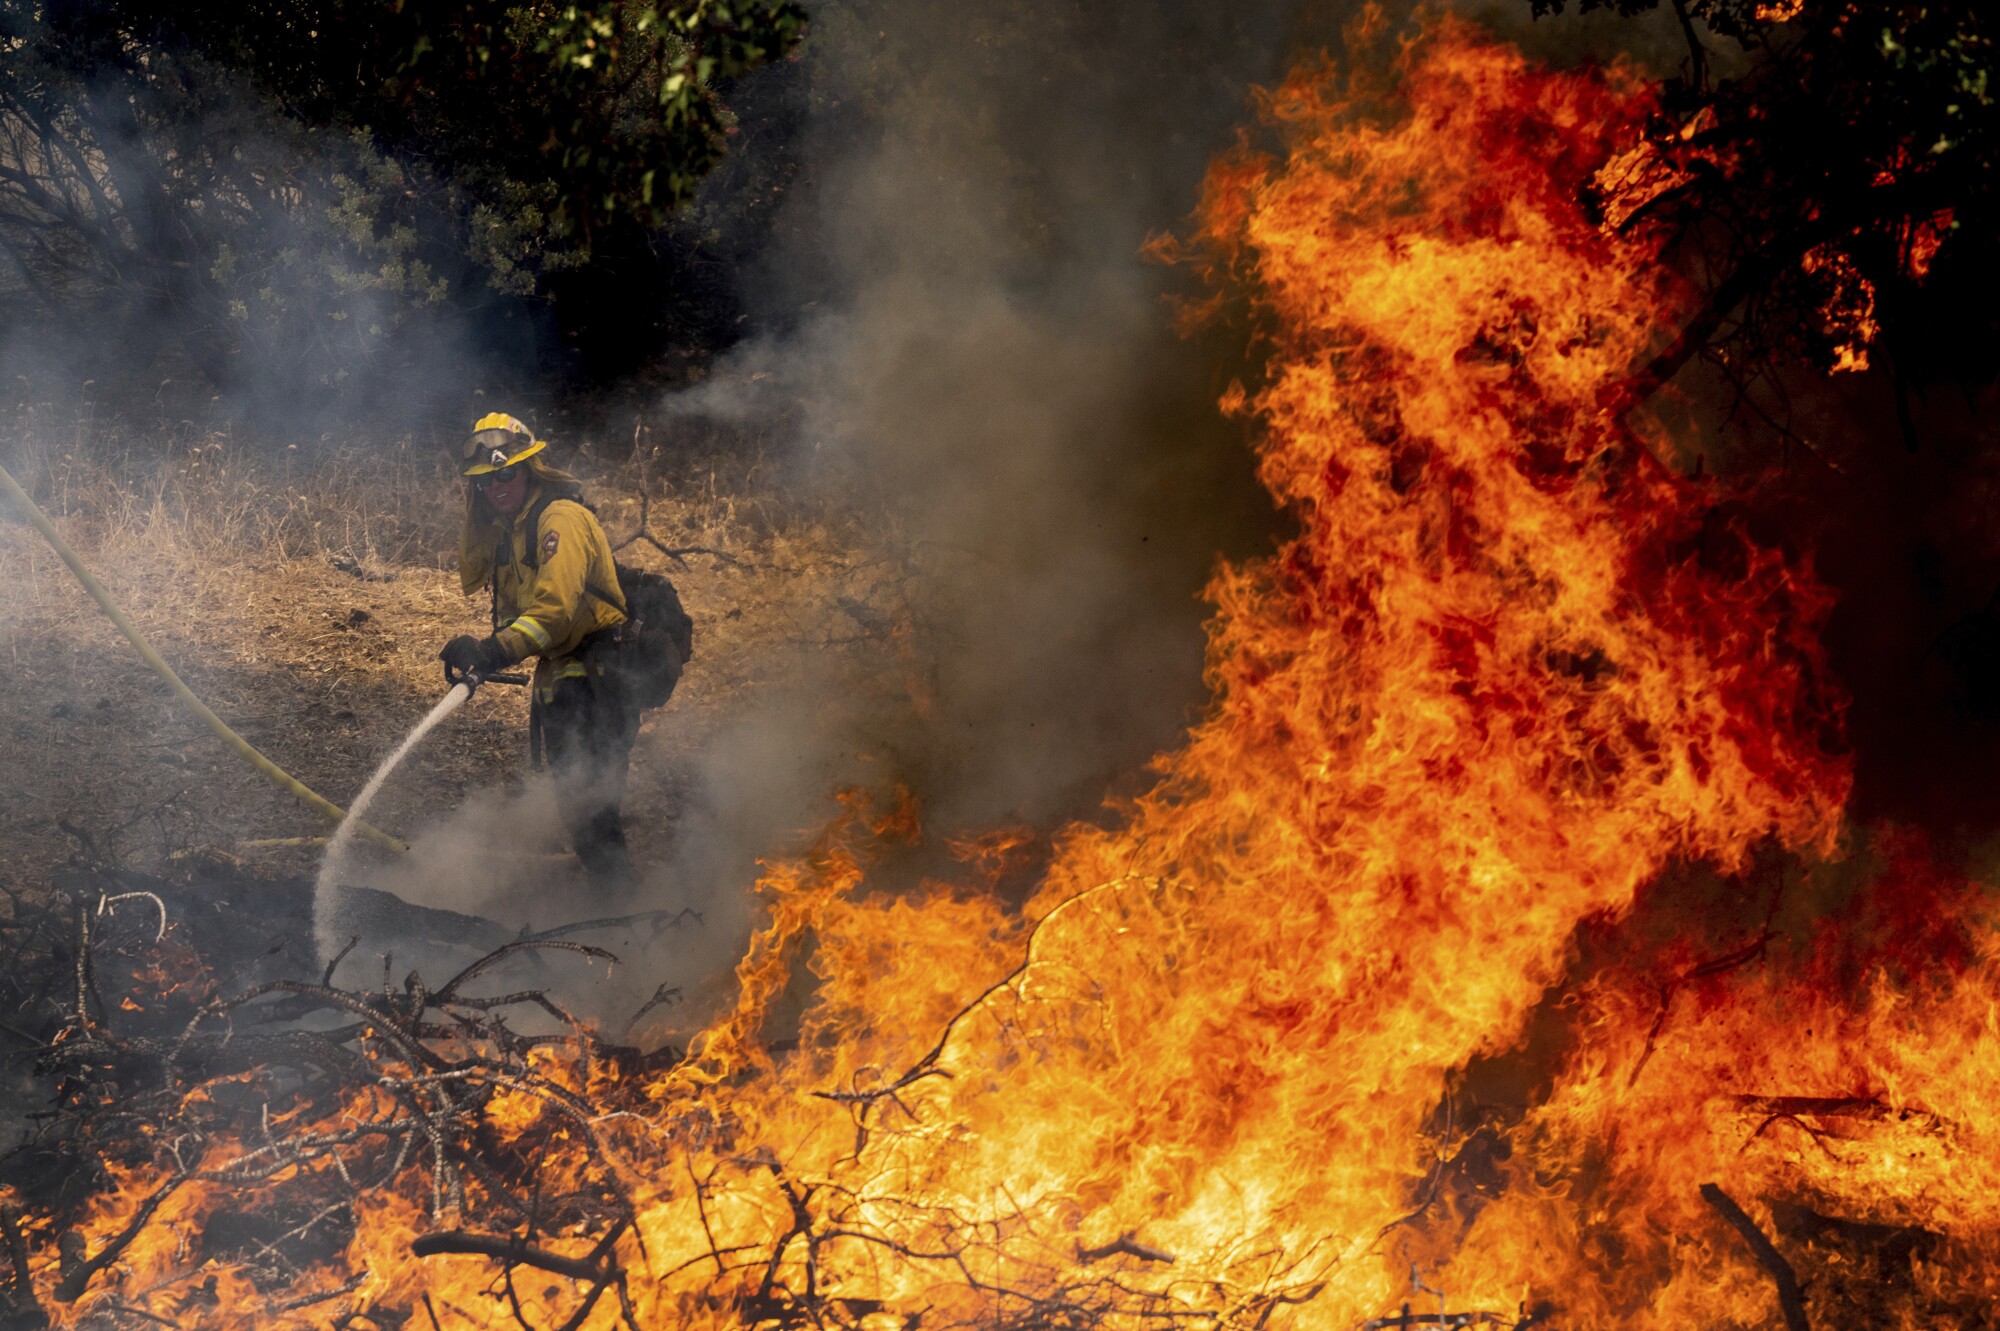 A firefighter sprinkles water on a forest fire.